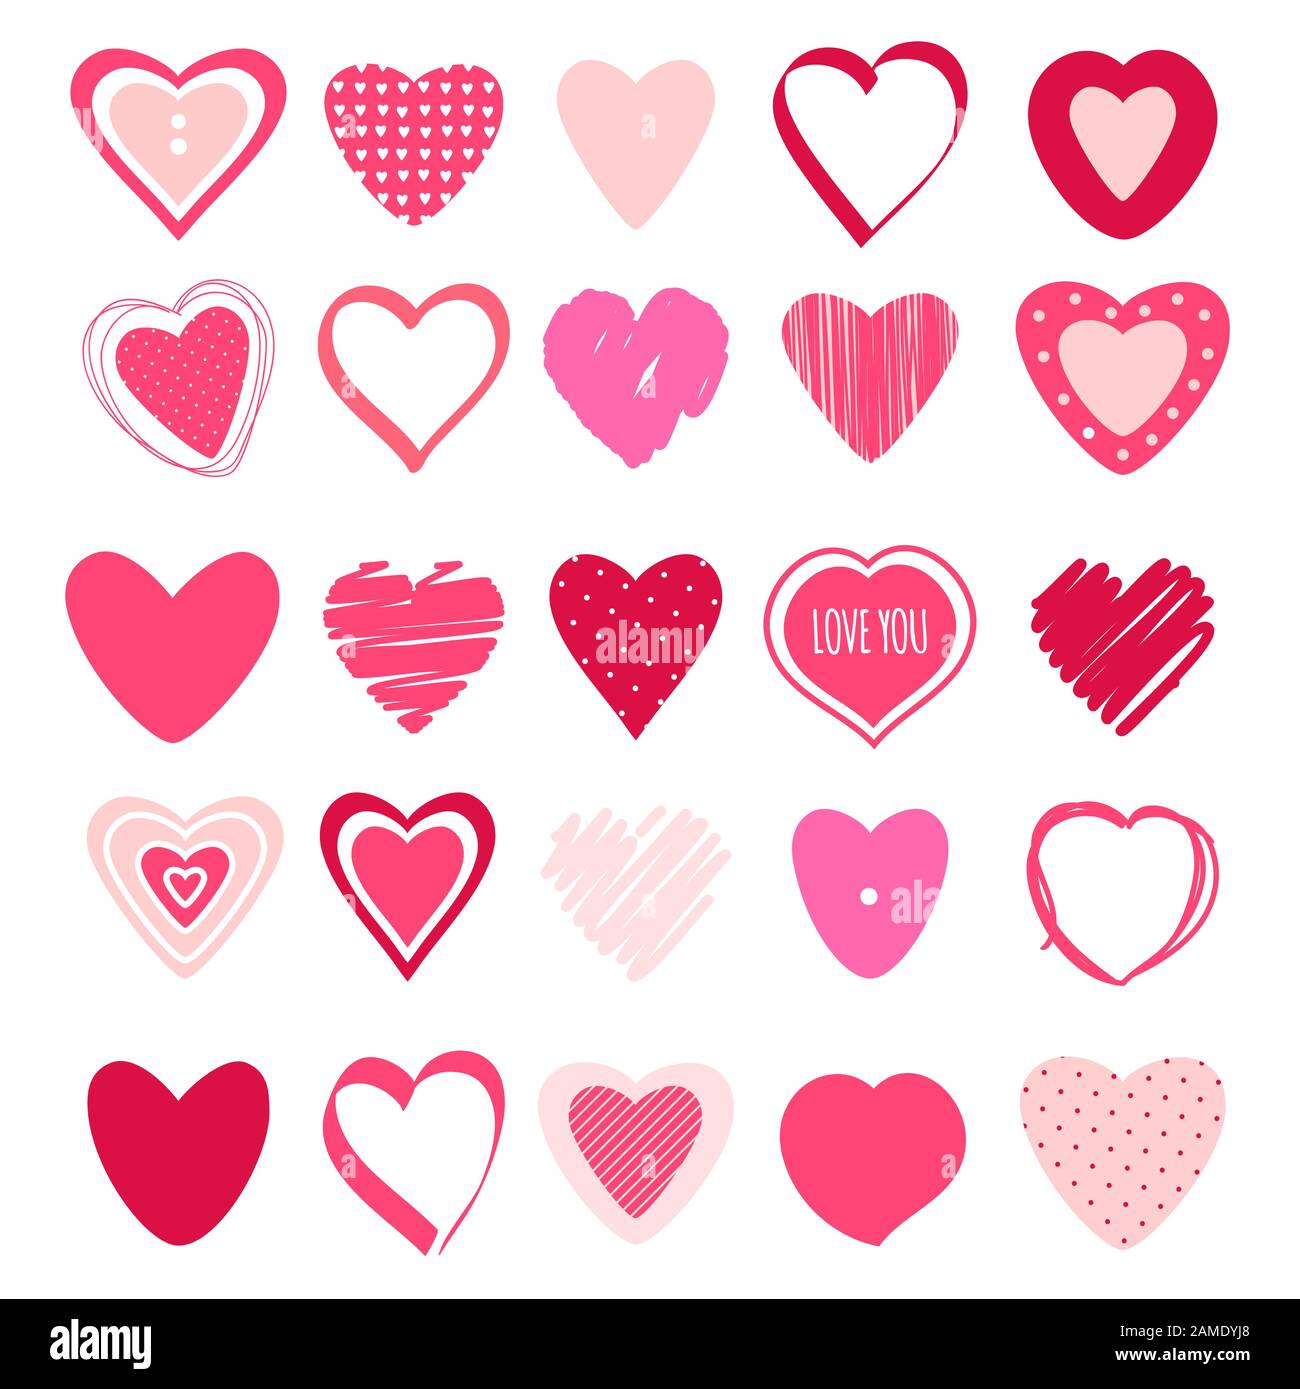 Set of Valentine heart icons of different shapes, red and pink colors. Collection of design elements for Valentine's day. Flat design. Isolated on whi Stock Vector